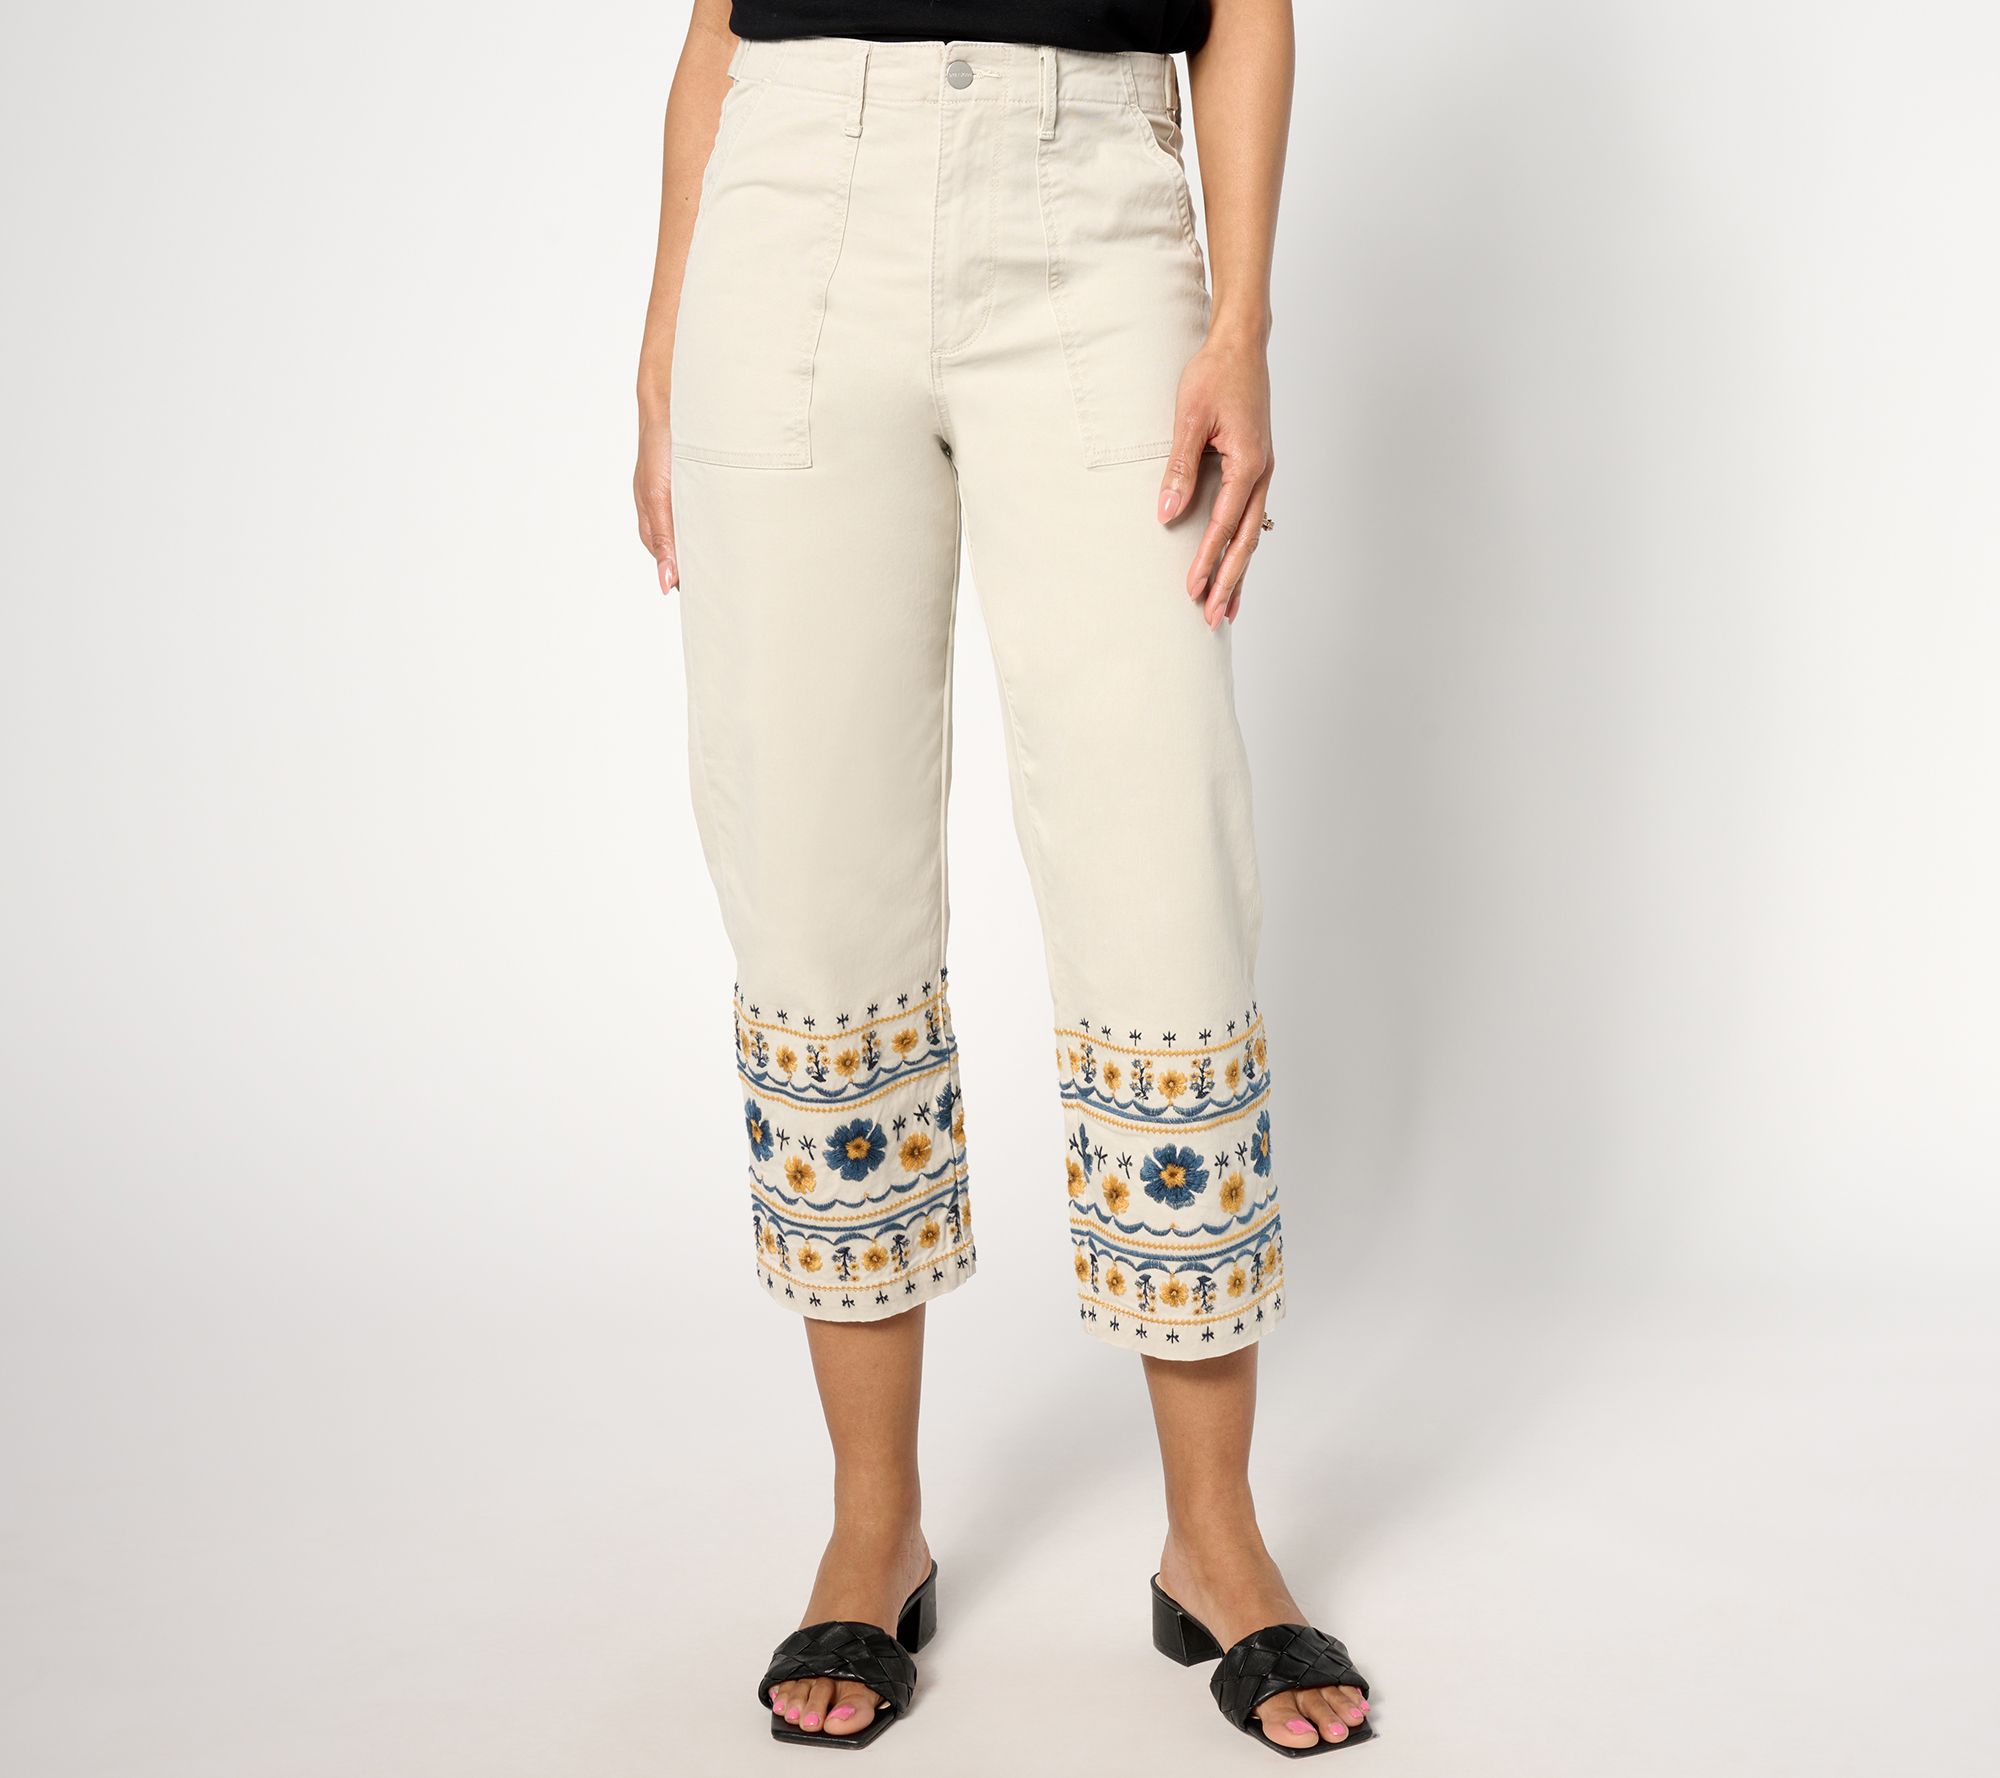 By Anthropologie Boxer Pants  Anthropologie Japan - Women's Clothing,  Accessories & Home